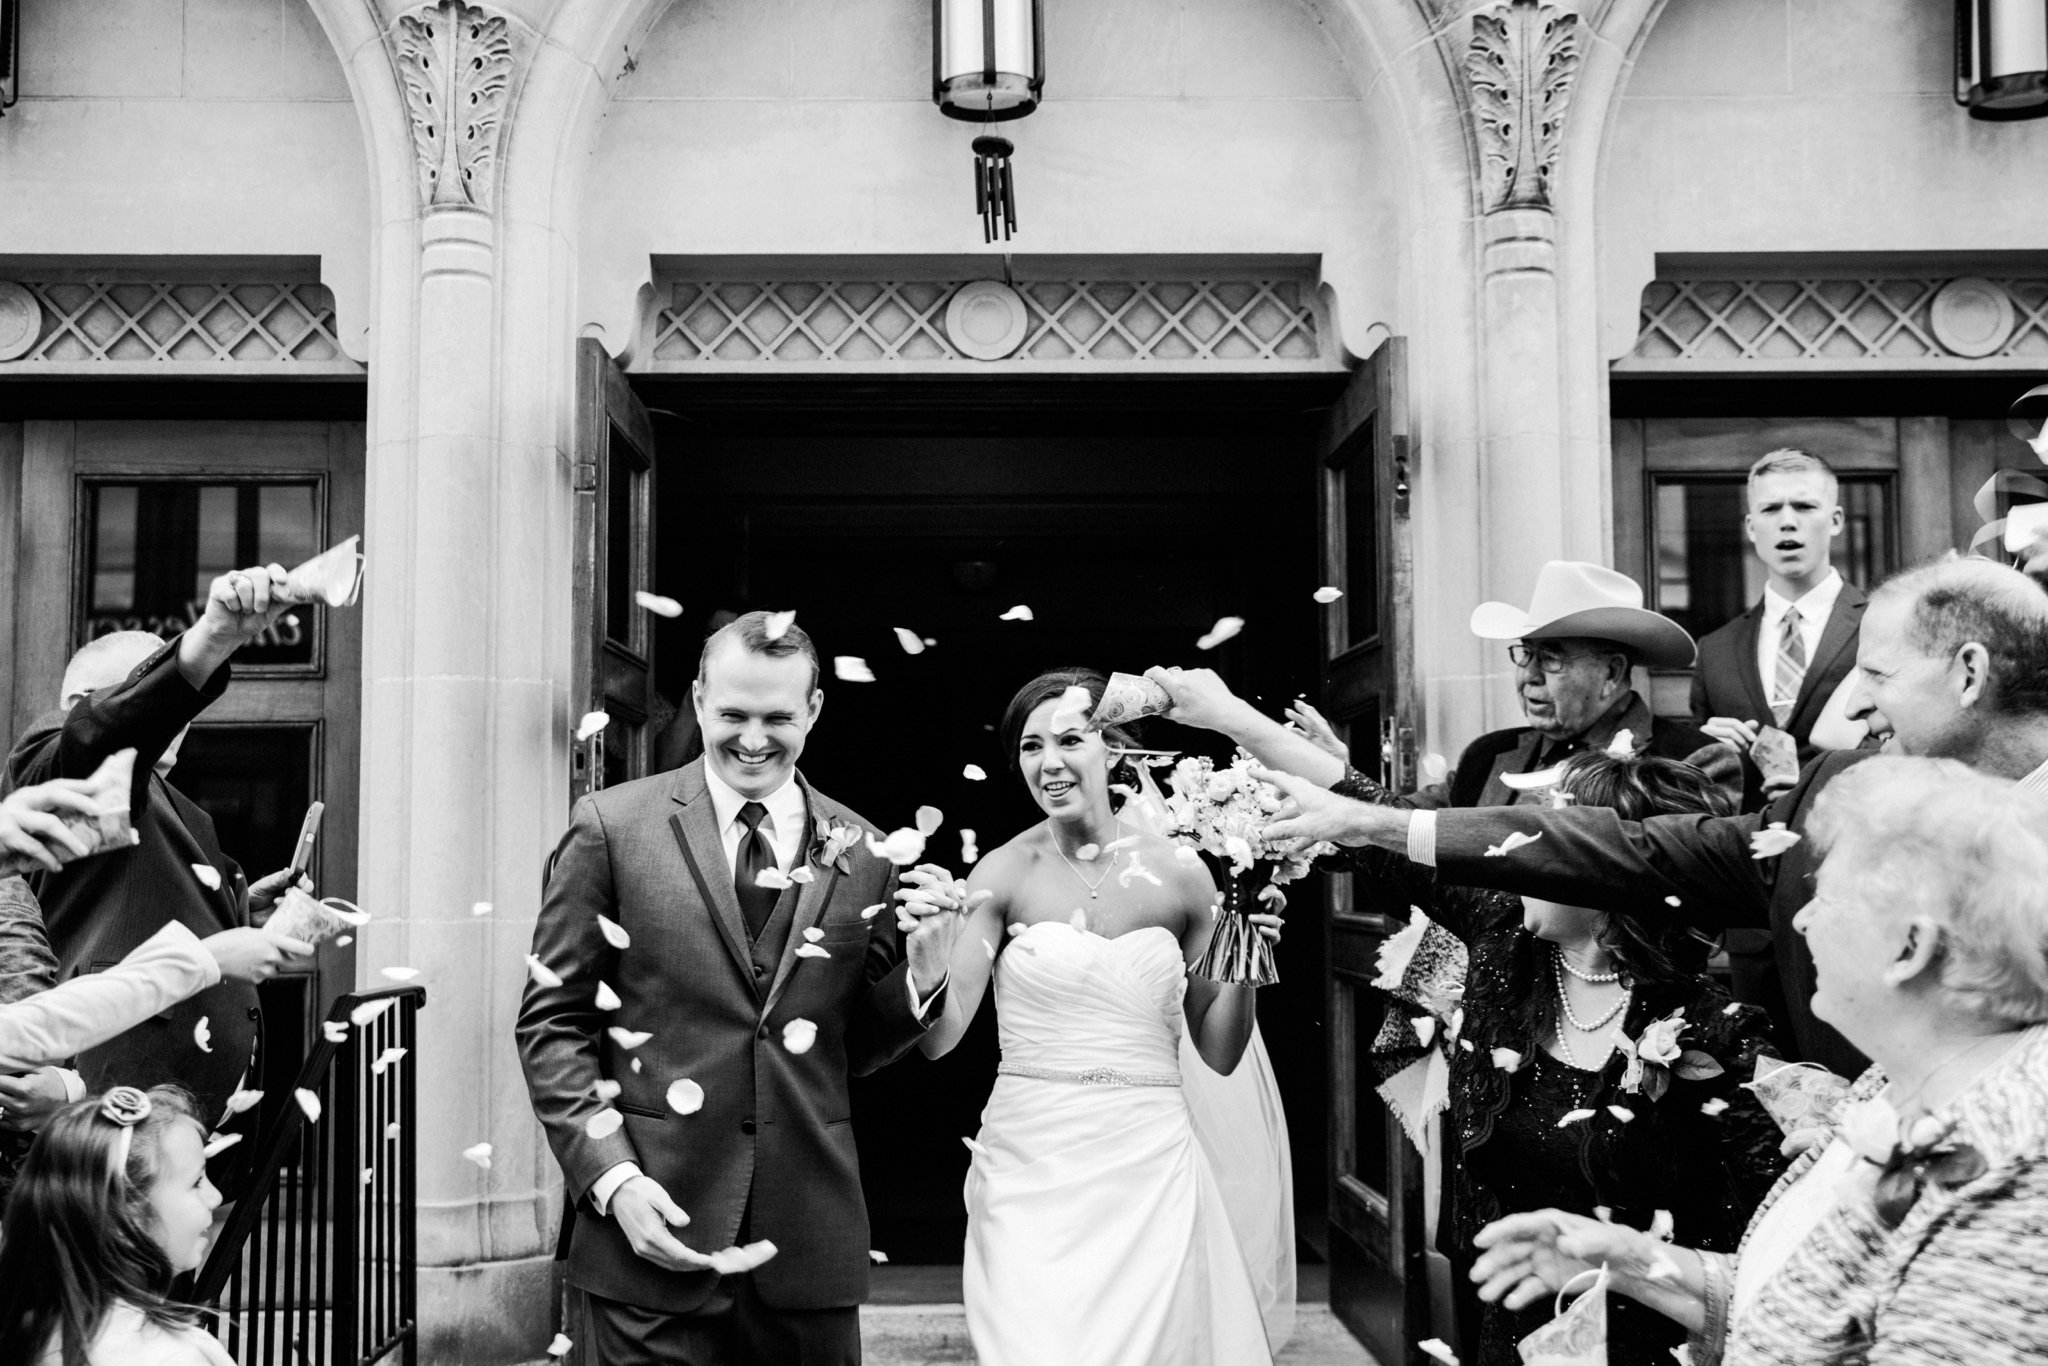 black and white | wedding | wedding photos | wedding photography | images by feliciathephotographer.com | Country Club Plaza | Kansas City | Unity Temple | wedding ceremony | man and wife | church exit | flower petals | confetti | celebration | candid 